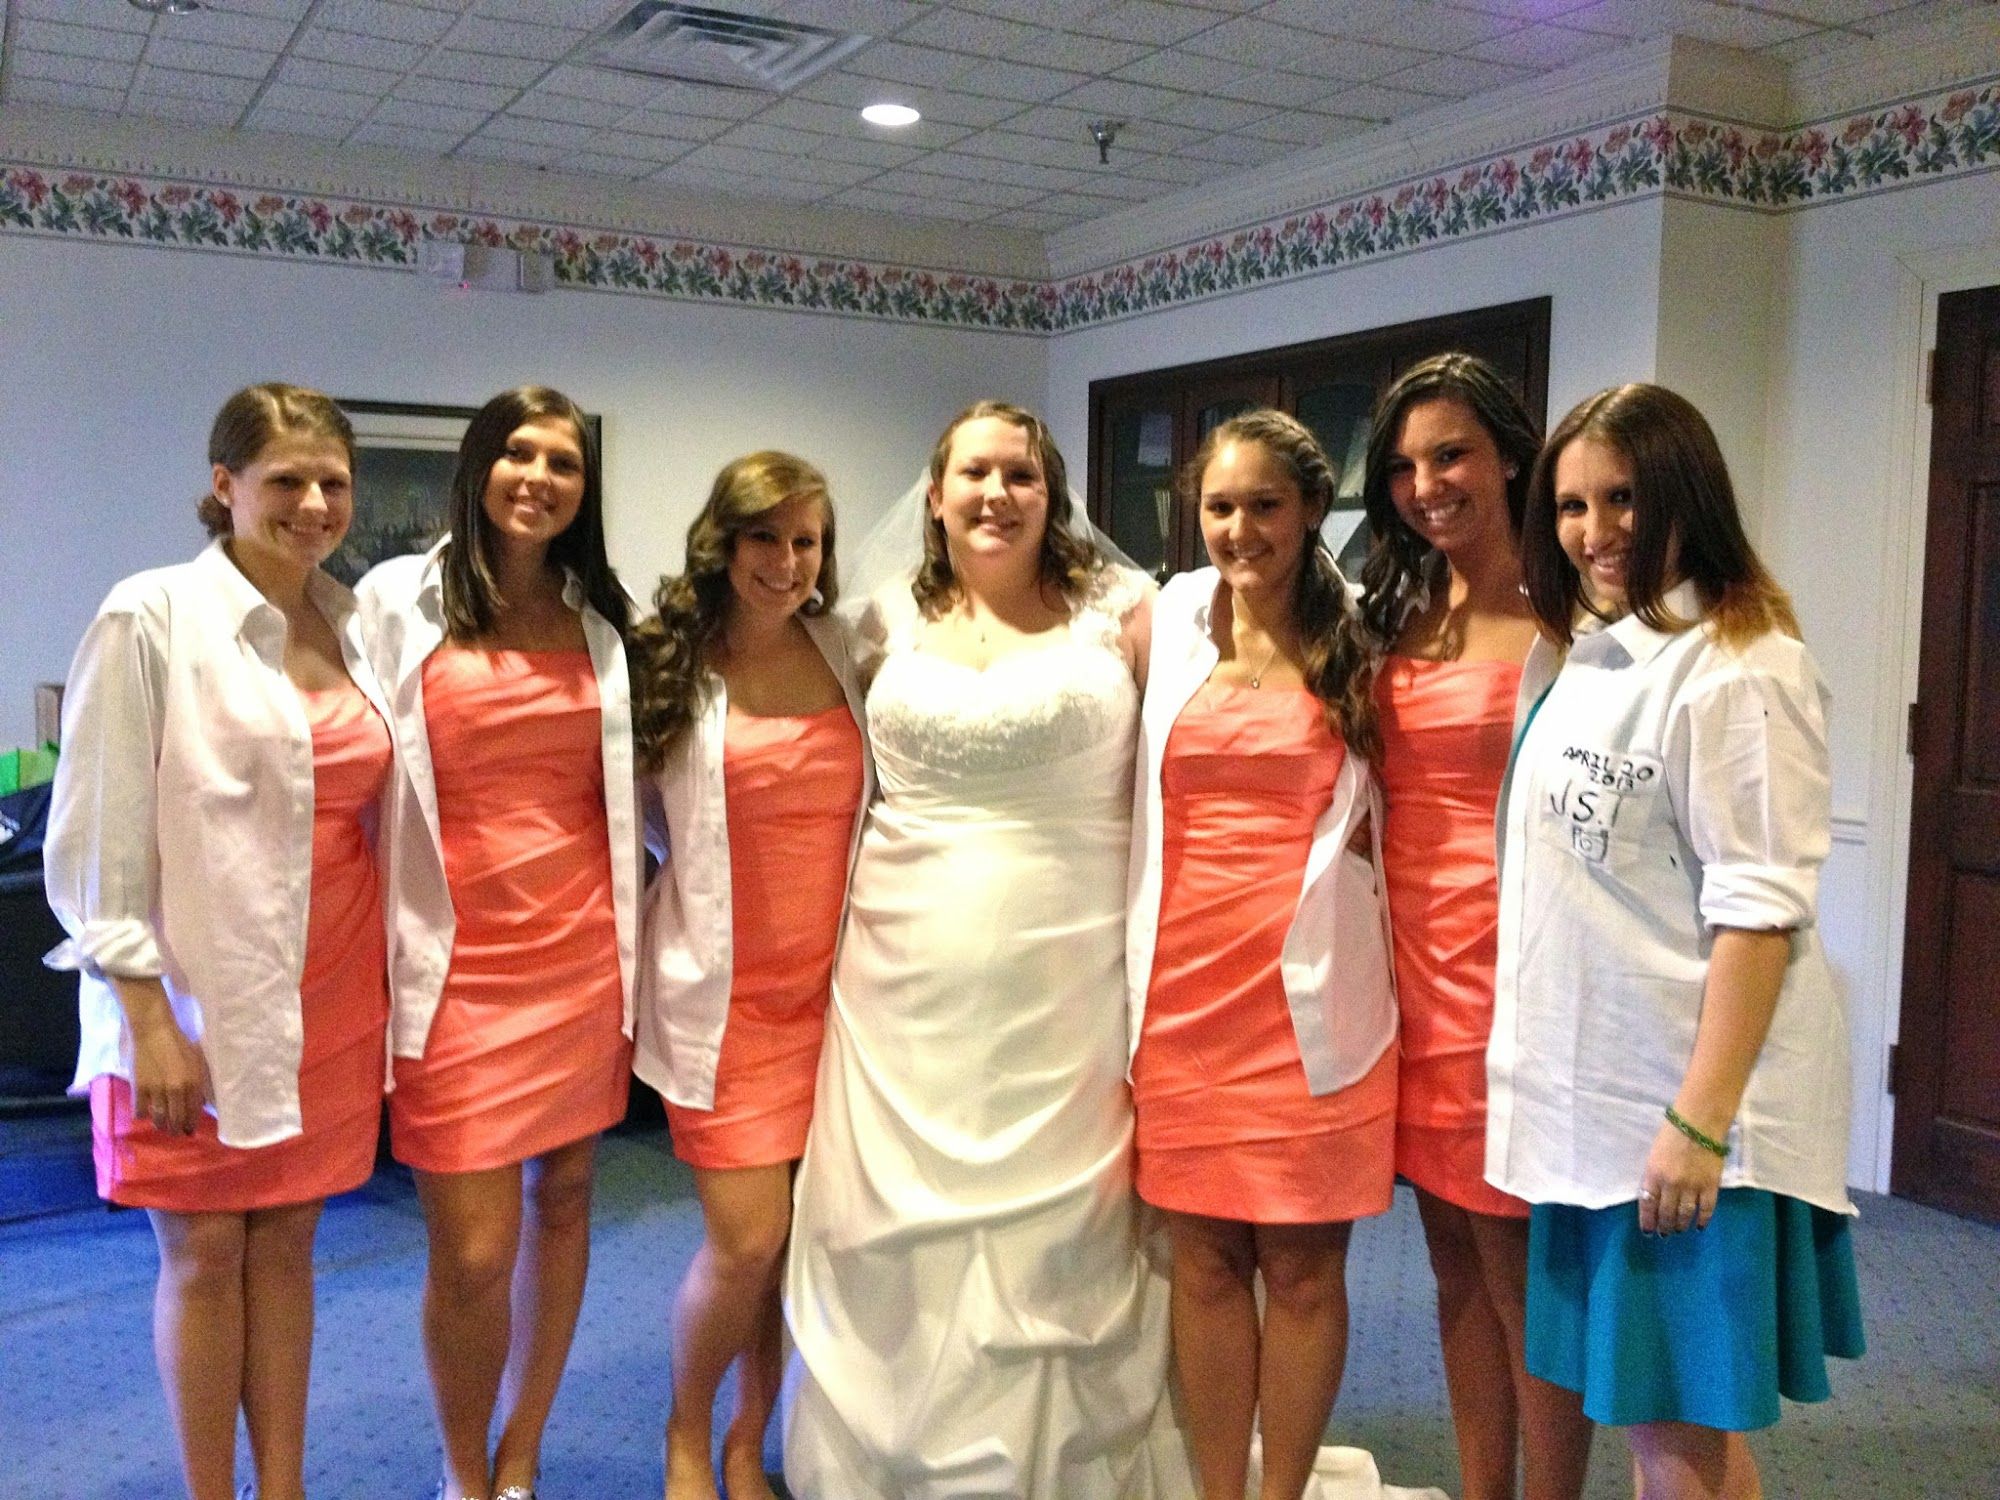  The Bride with her Maid of Honor and Bridesmaids 